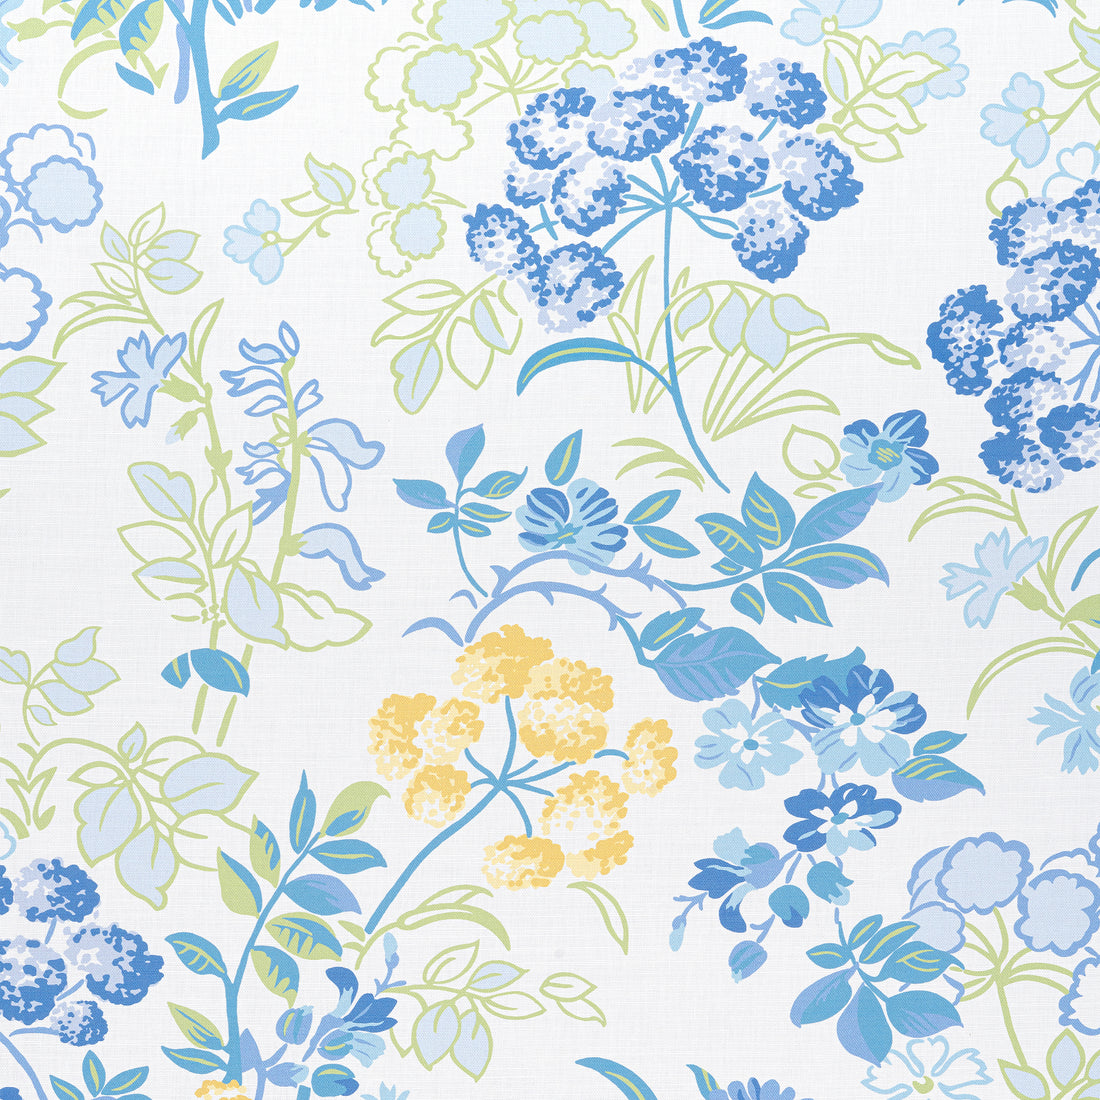 Spring Garden fabric in blue and white color - pattern number F914336 - by Thibaut in the Canopy collection